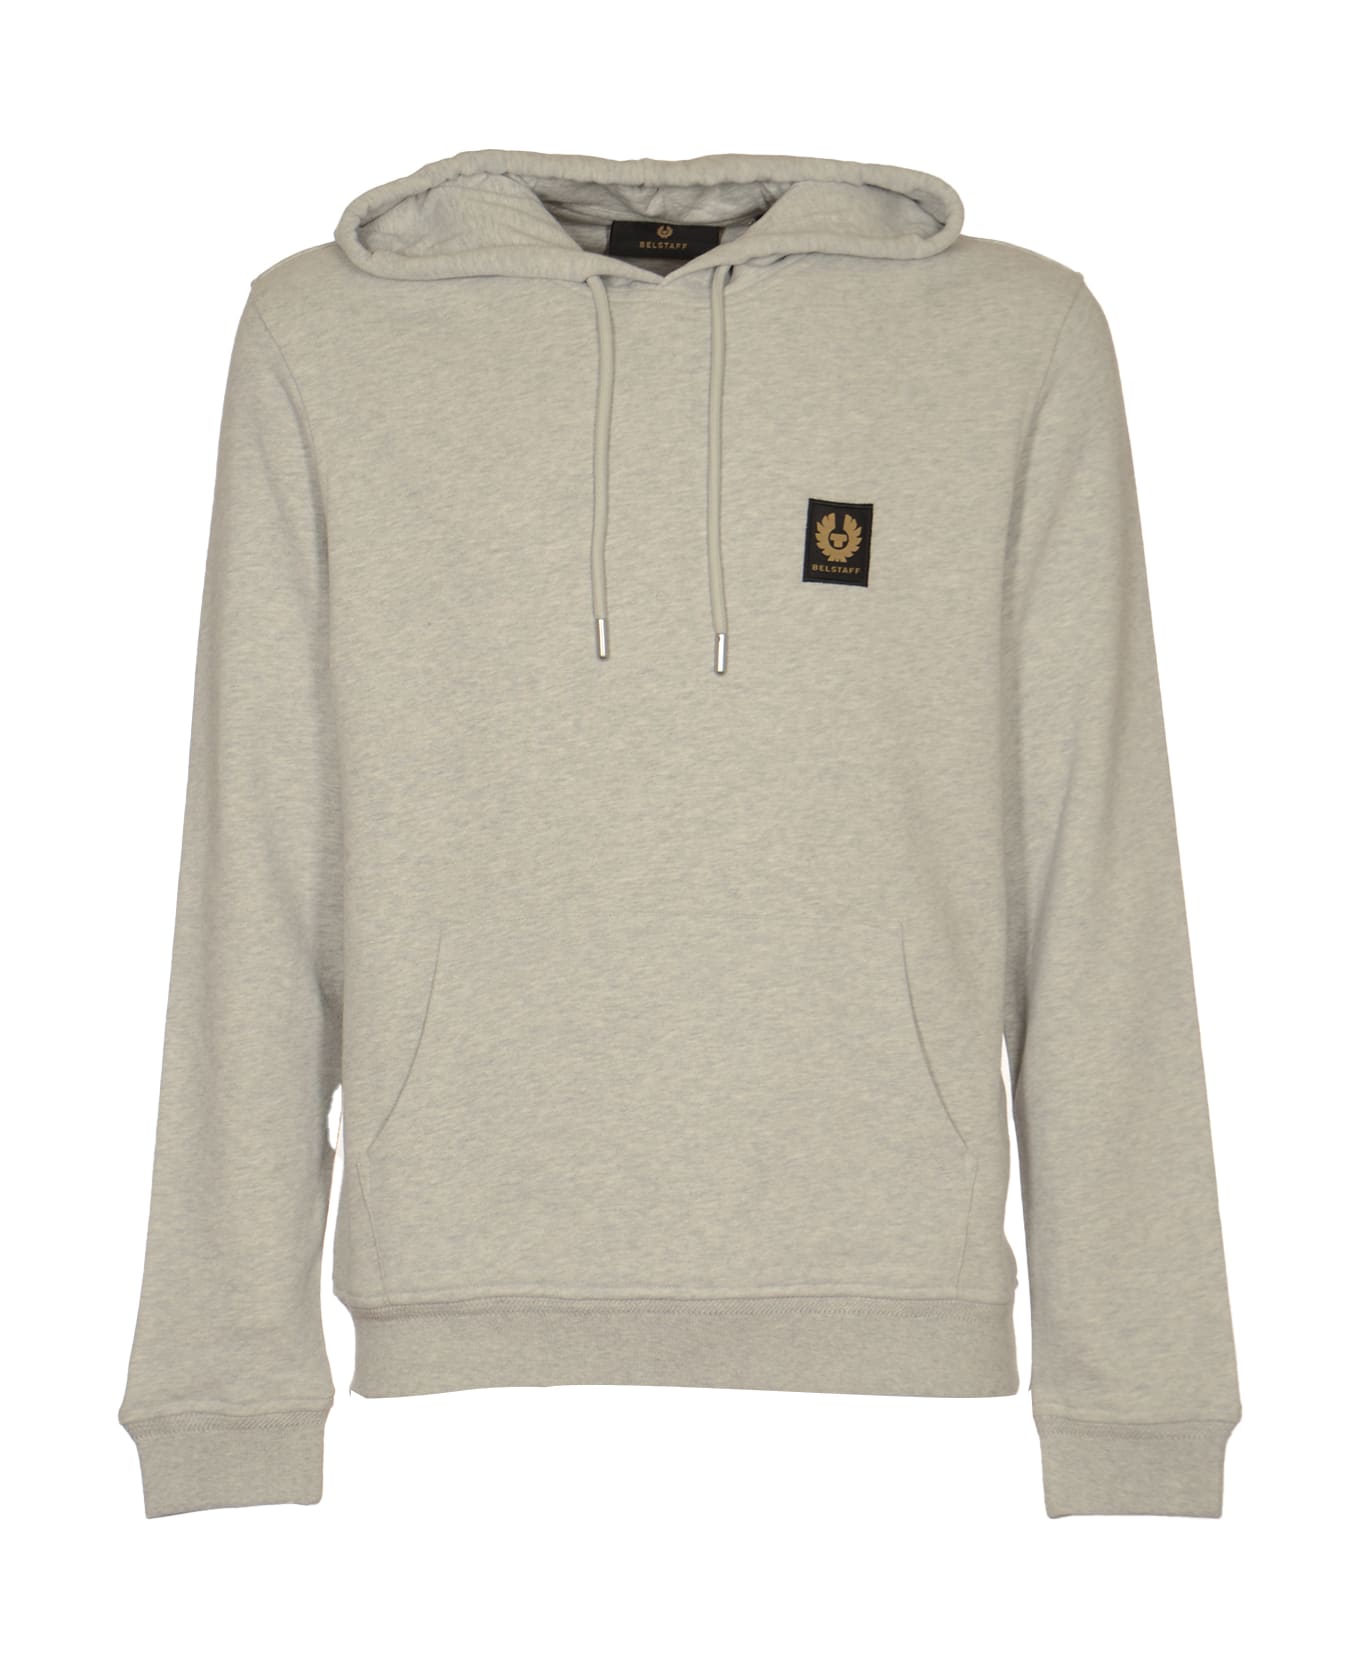 Belstaff Logo Patched Rib Trim Hoodie - Old Silver Heather